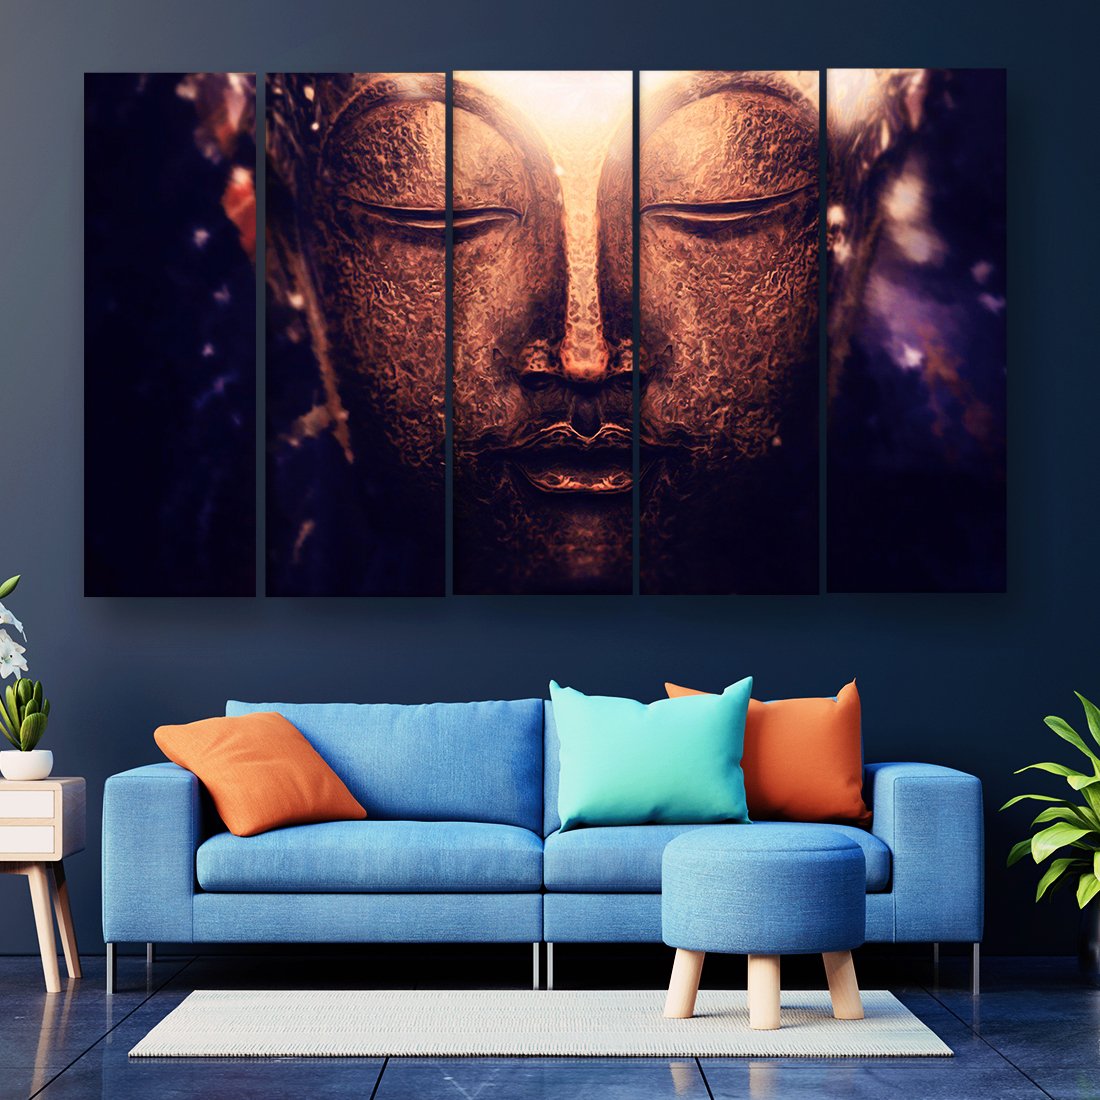 Casperme Buddha Wall Painting For Living Room for Bedroom, Hotels & Office Decoration (48W x 30H inches) Casper_HD_MF_401